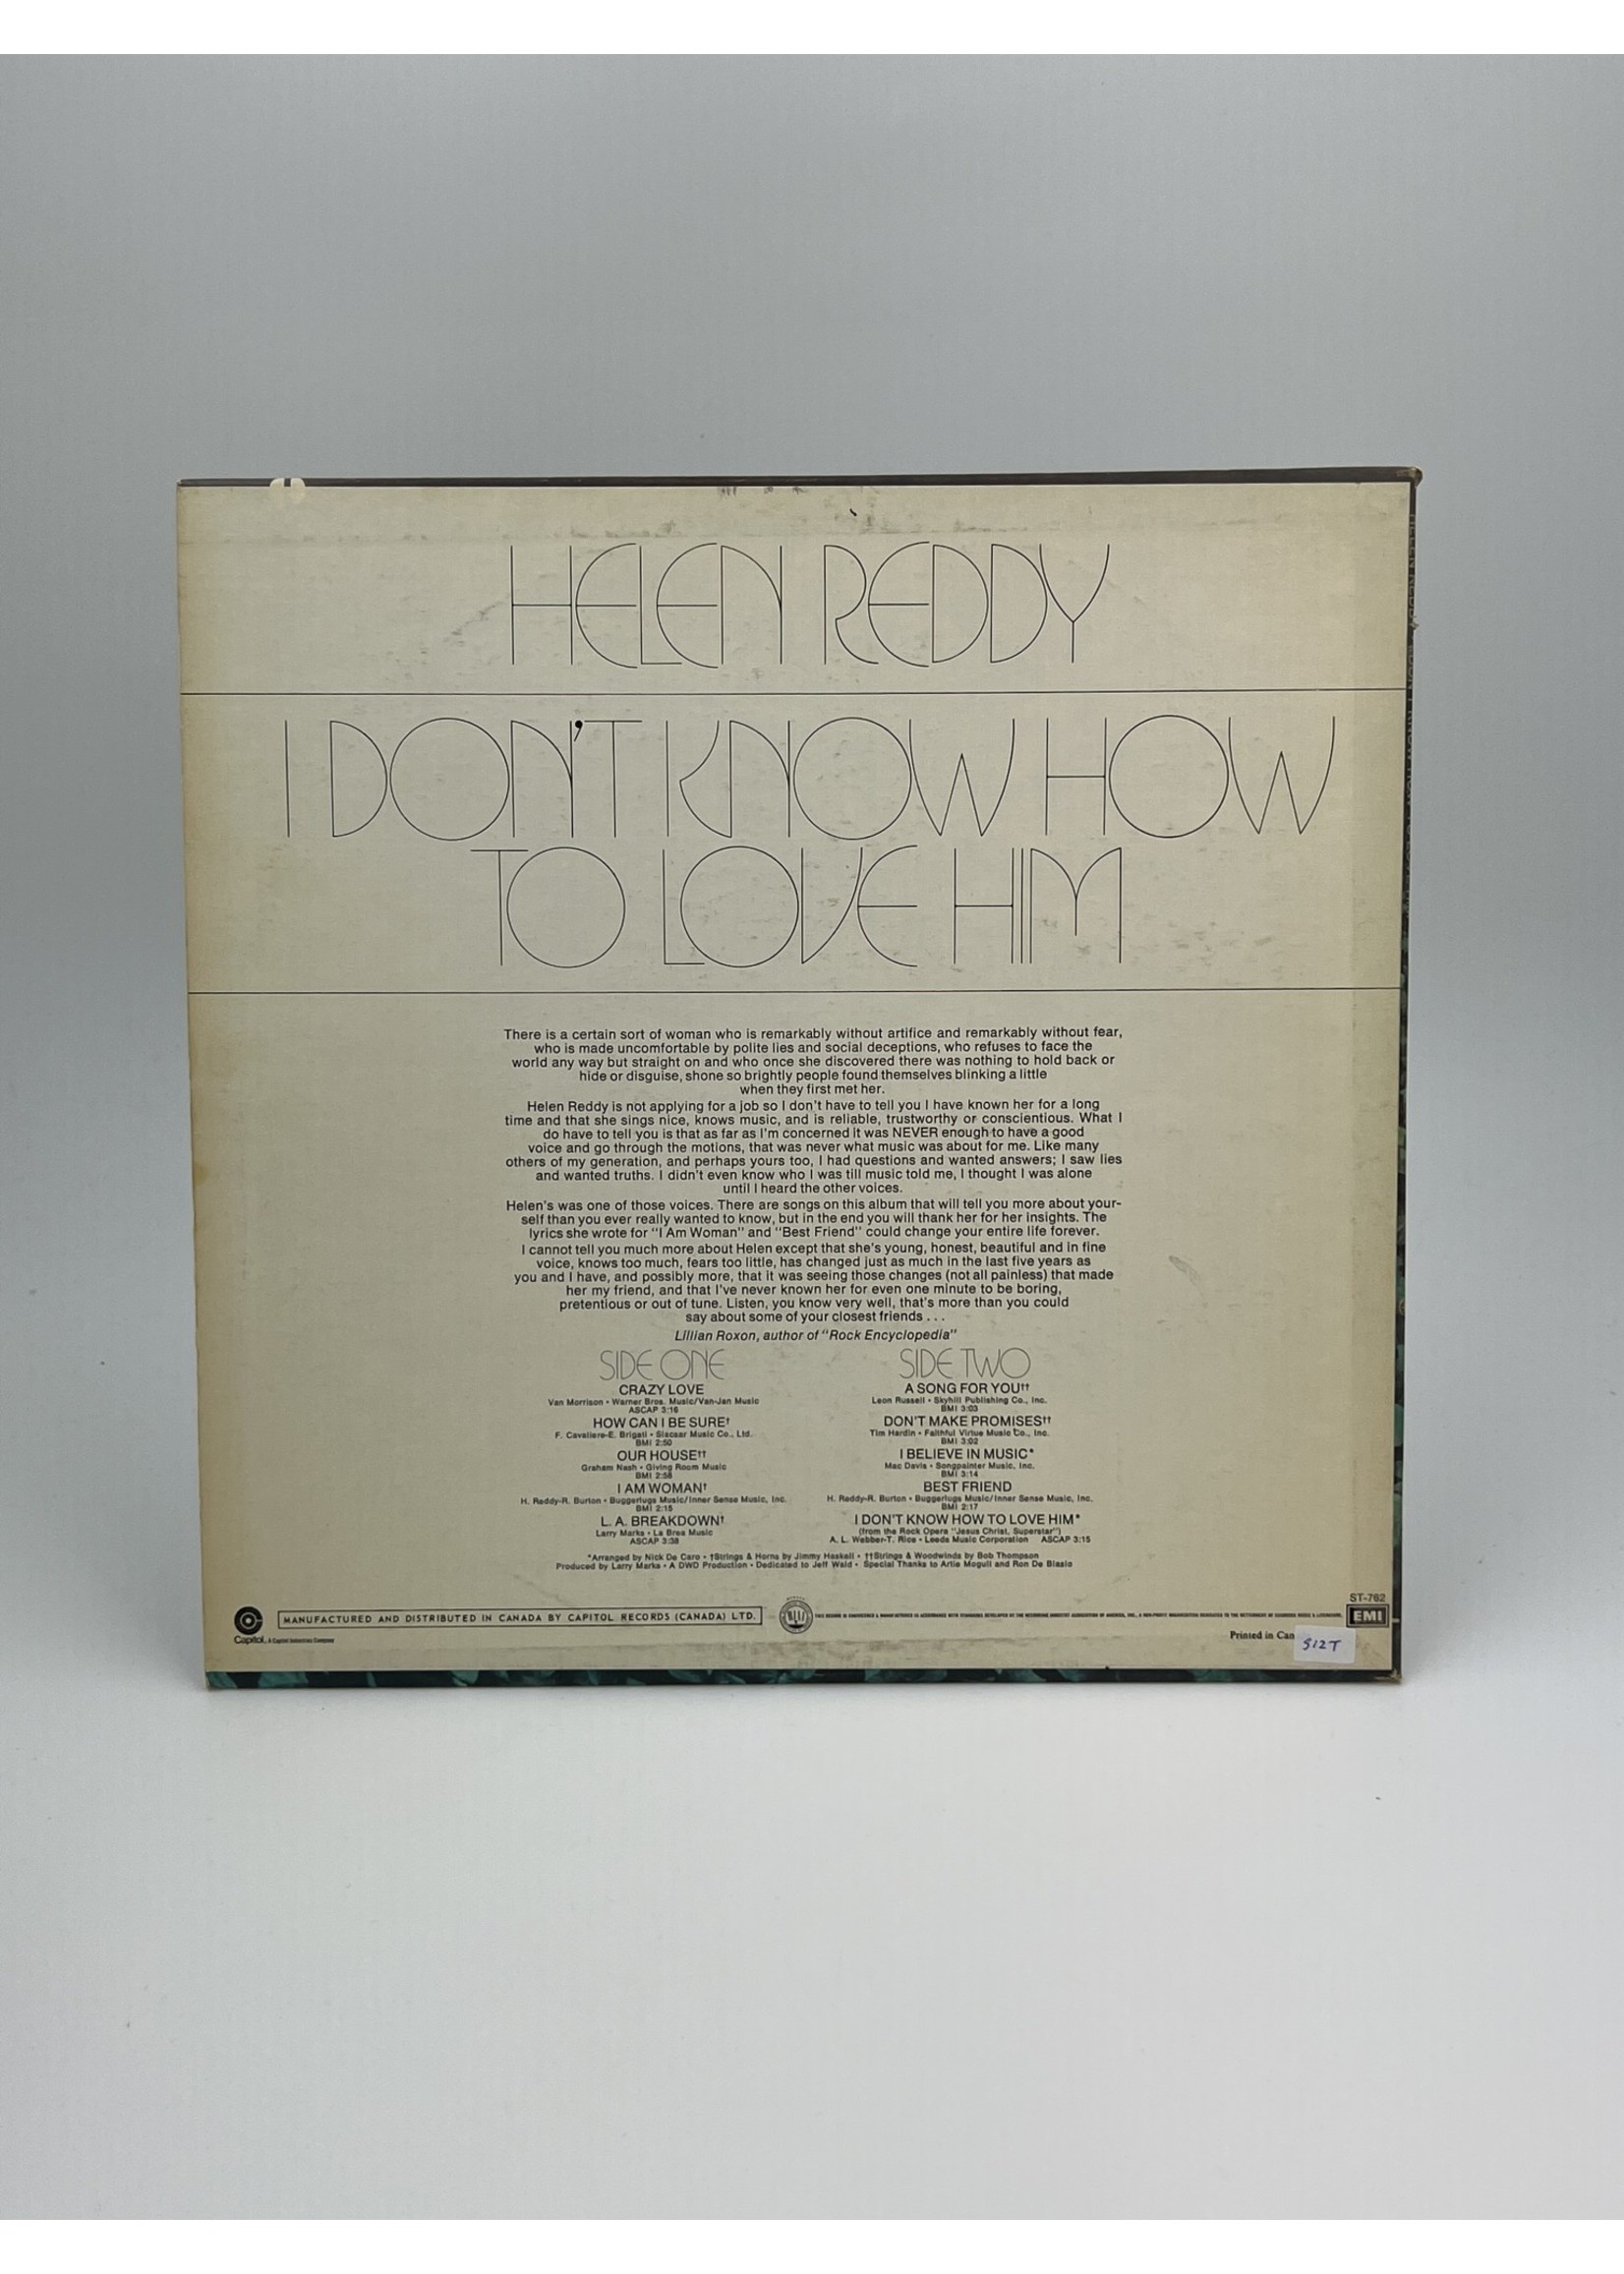 LP Helen Reddy I Dont Know How To Love Him LP Record